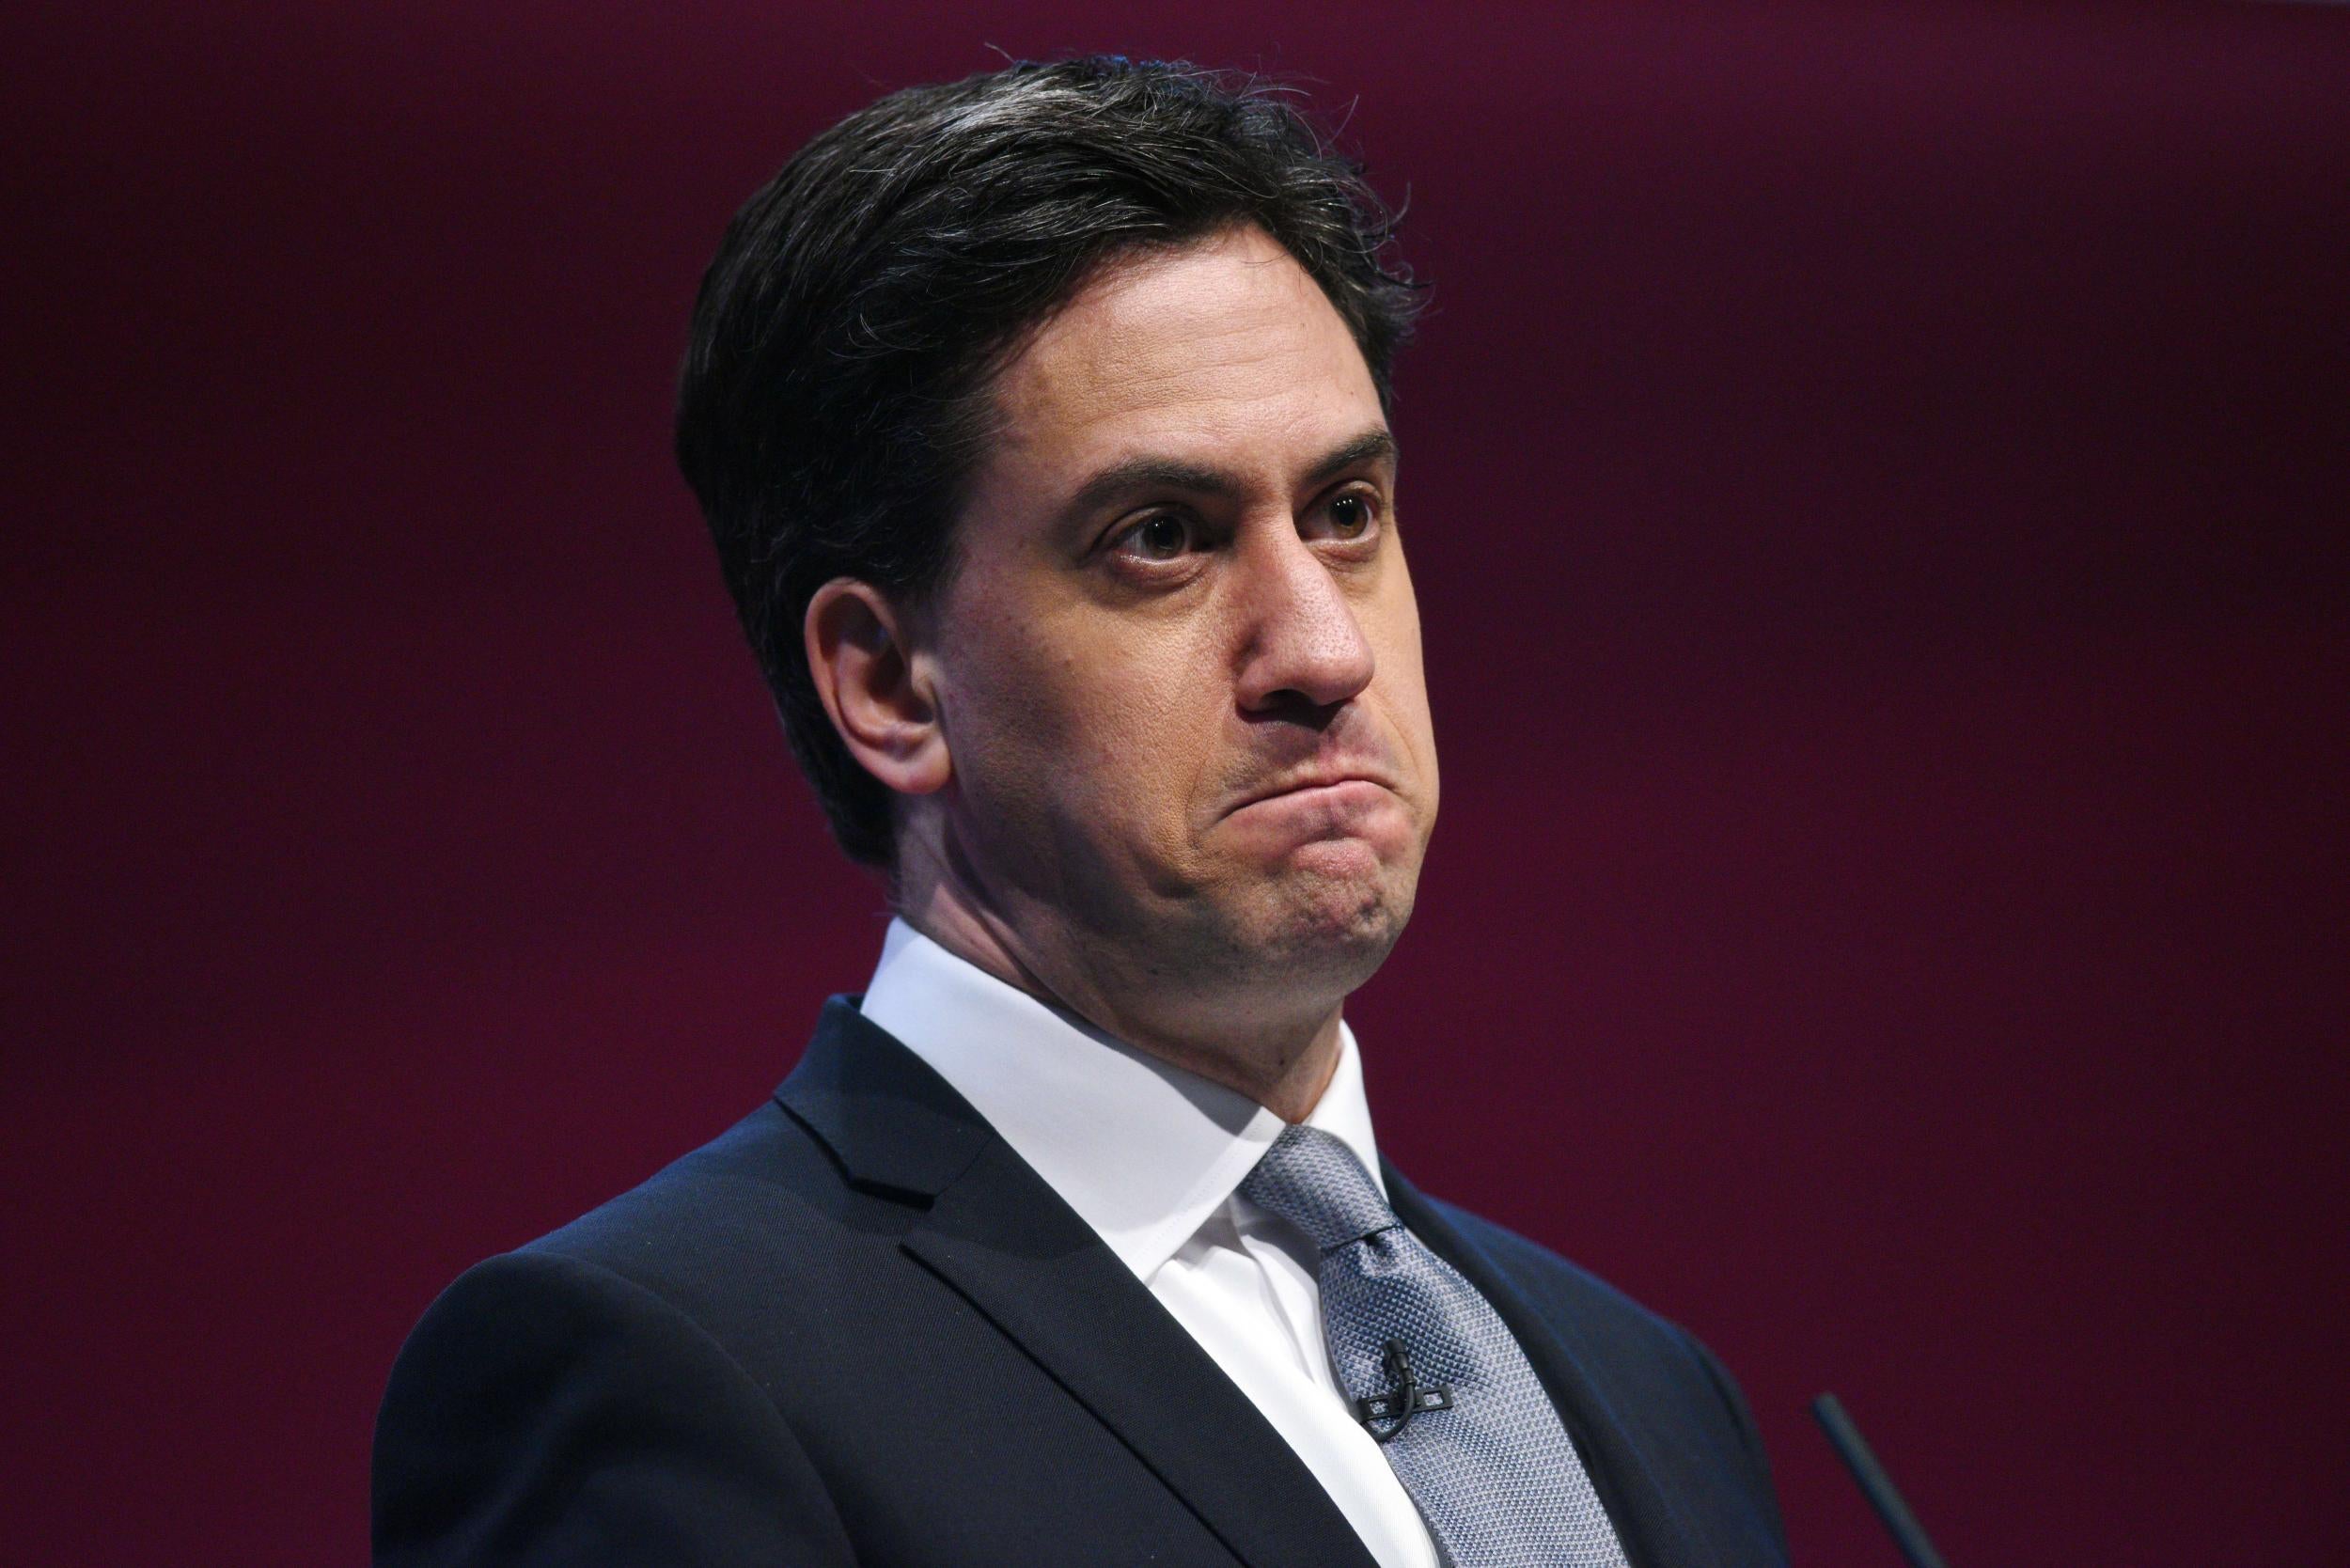 Ed Miliband lost the 2015 general election to David Cameron